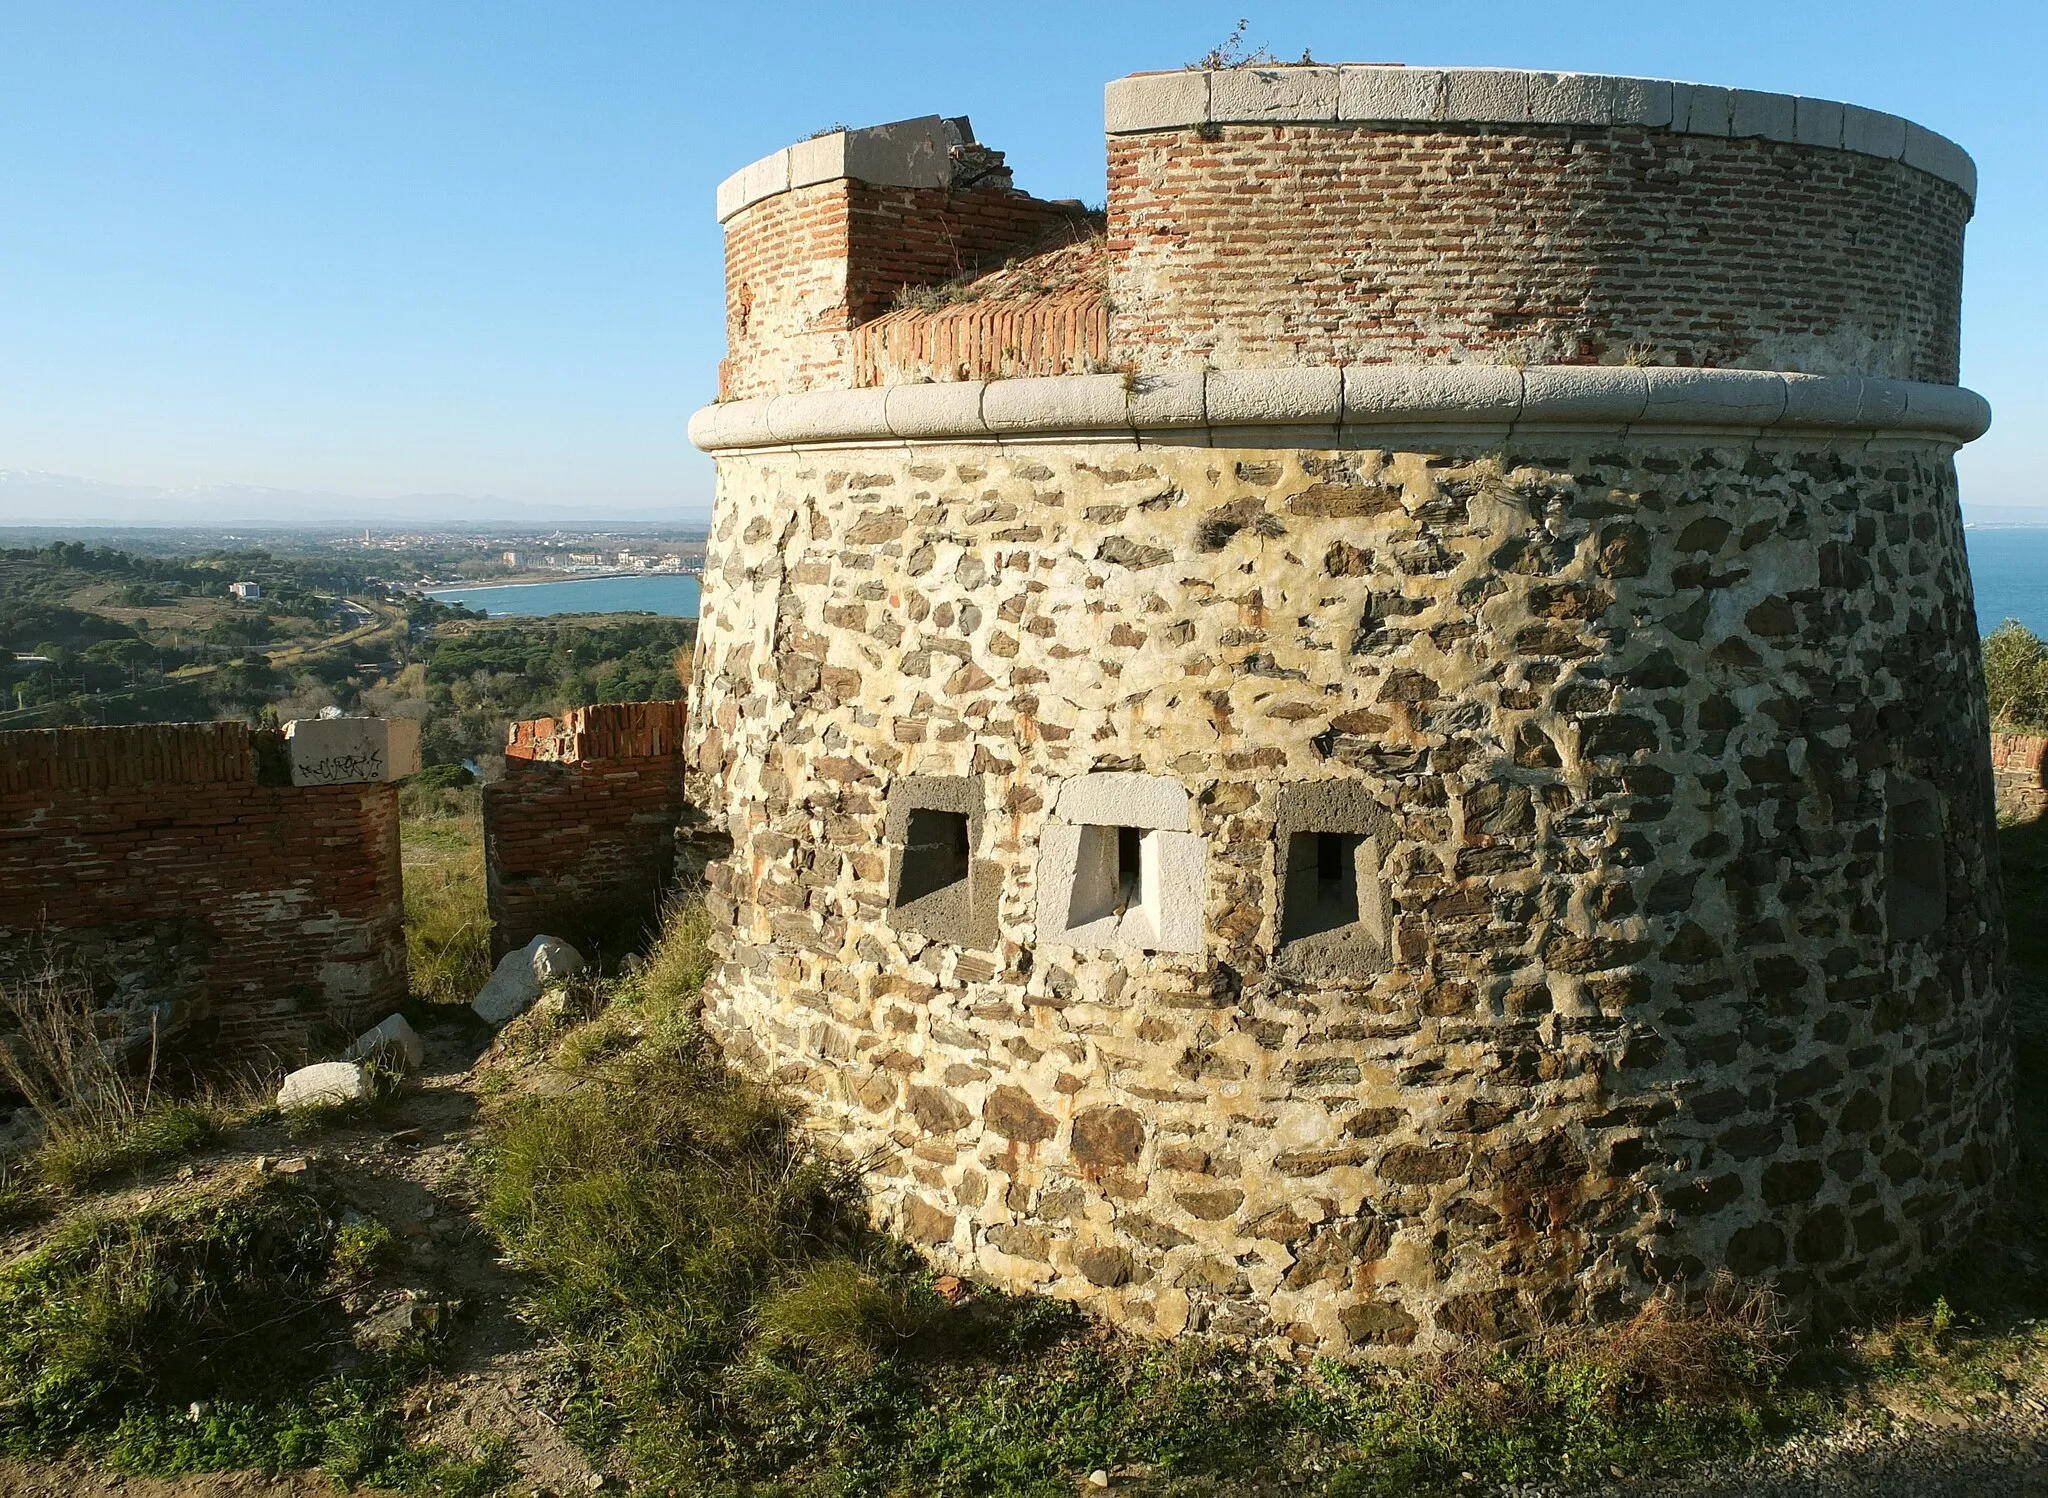 Photo showing: Collioure: Fortification Tour de l'étoile (also called Fort rond) built in 1725, the bay of Argelès in the backgound.